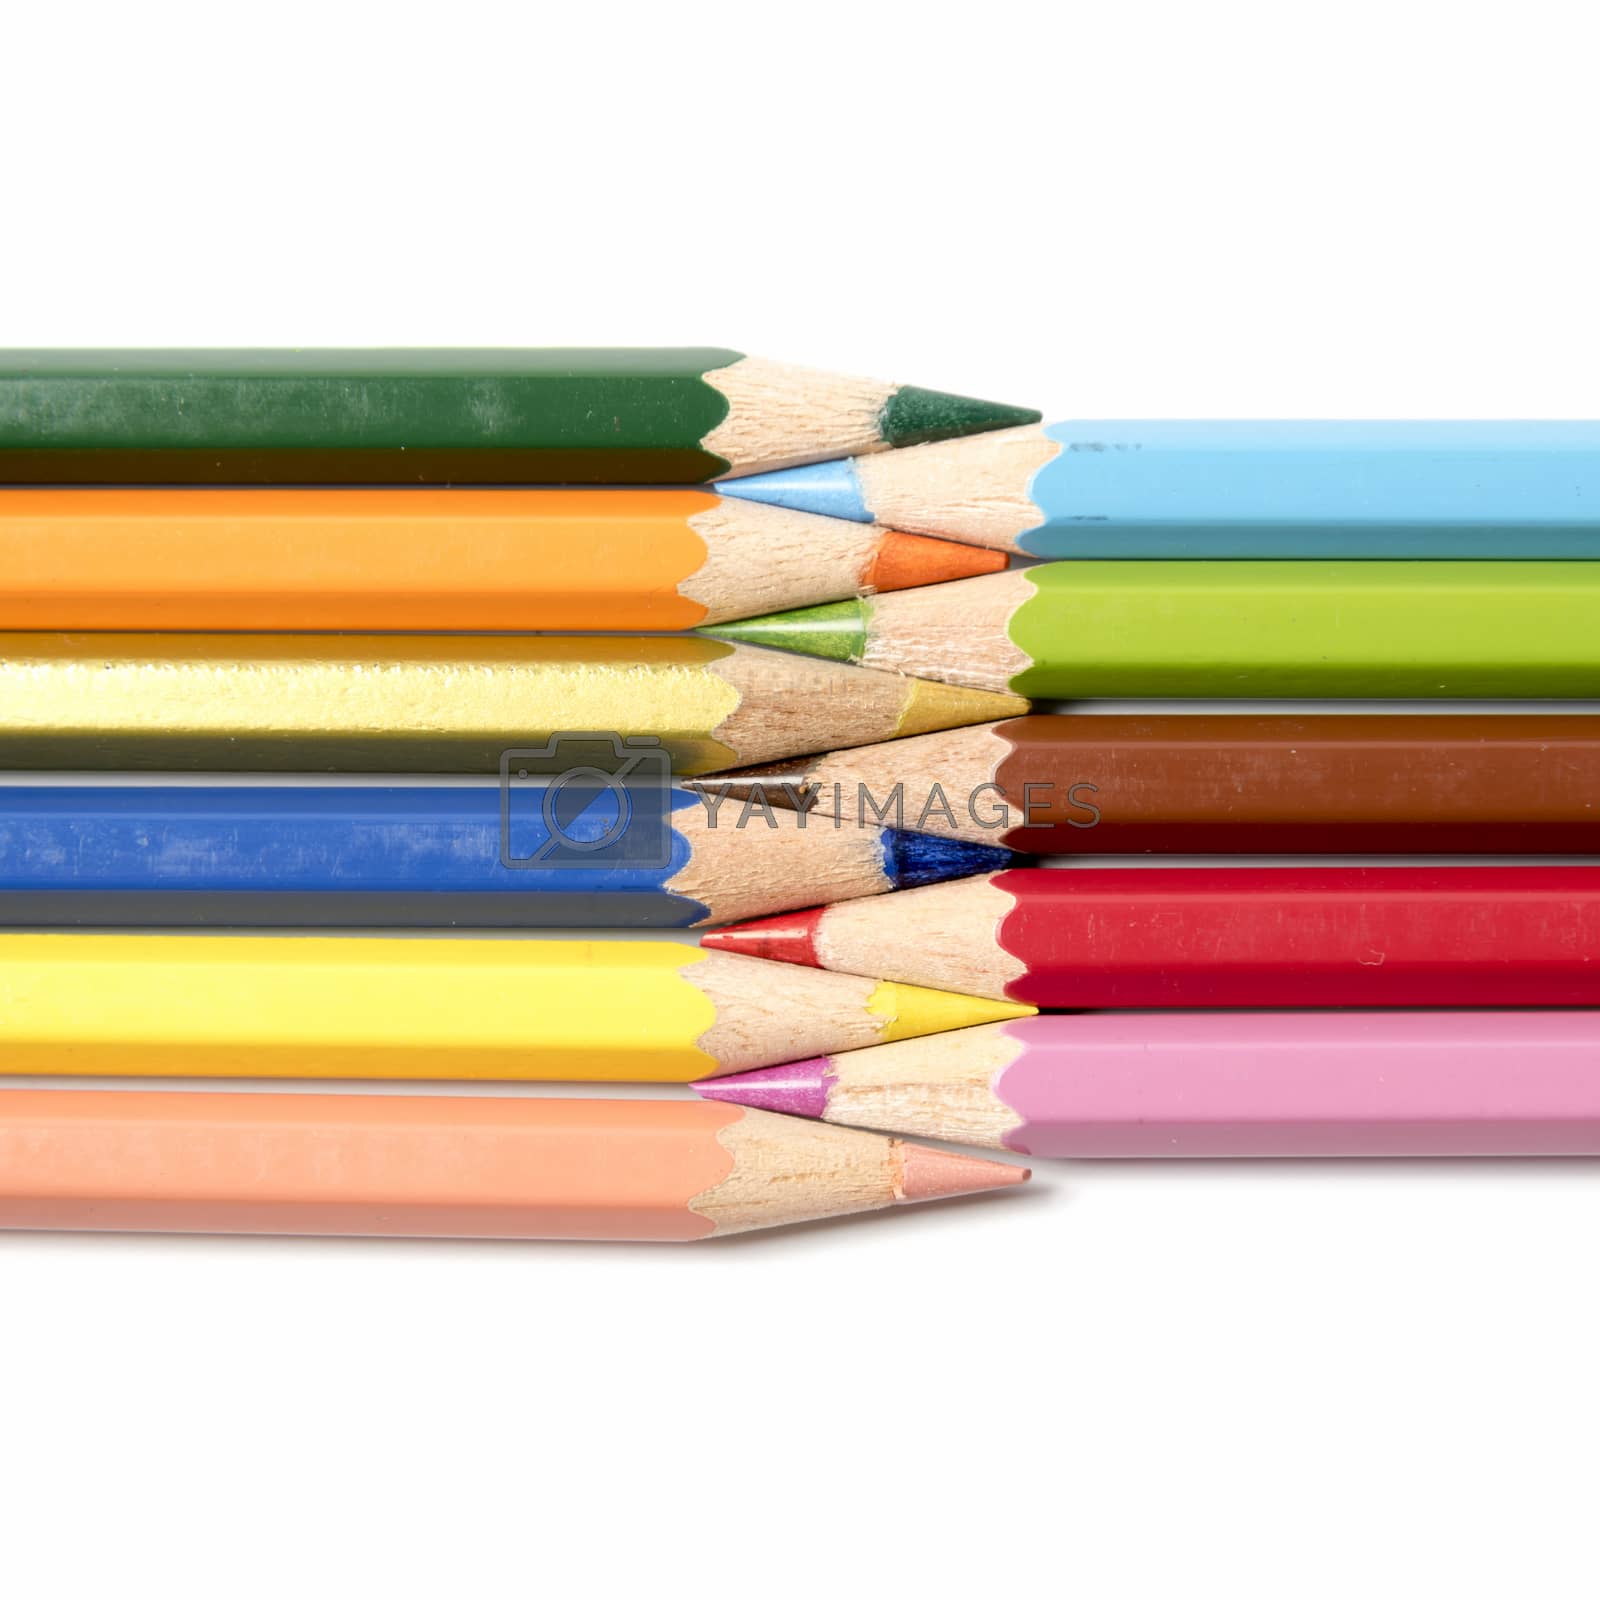 Royalty free image of colorful pencil by ammza12